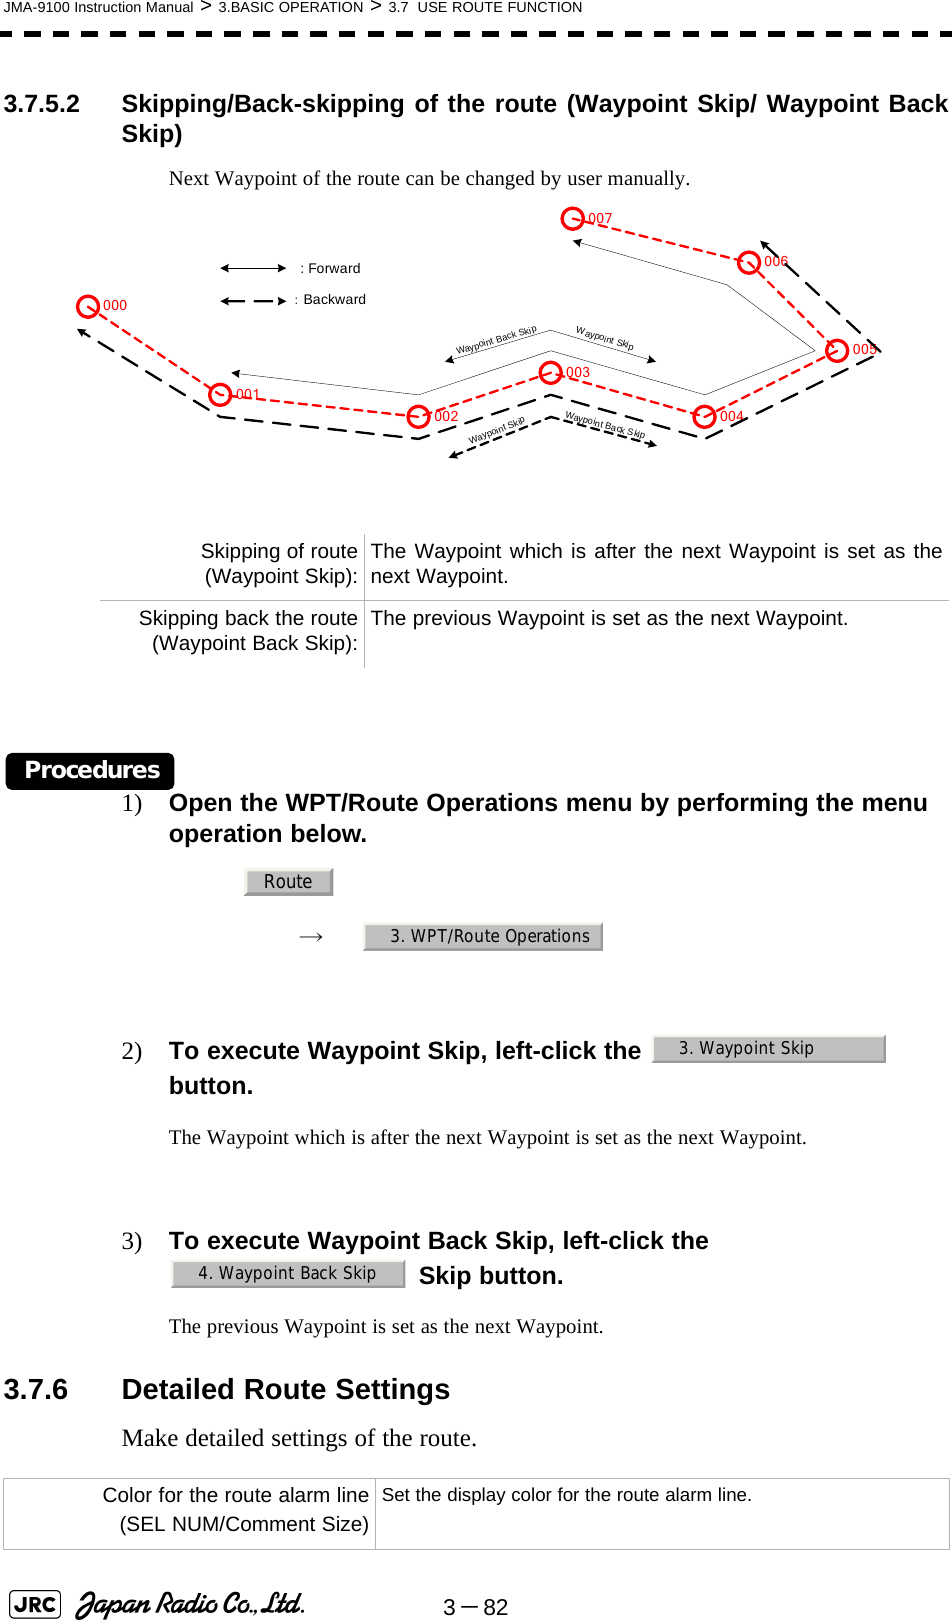 3－82JMA-9100 Instruction Manual &gt; 3.BASIC OPERATION &gt; 3.7  USE ROUTE FUNCTION3.7.5.2 Skipping/Back-skipping of the route (Waypoint Skip/ Waypoint BackSkip)Next Waypoint of the route can be changed by user manually.Procedures1) Open the WPT/Route Operations menu by performing the menu operation below.→　2) To execute Waypoint Skip, left-click the    button.The Waypoint which is after the next Waypoint is set as the next Waypoint.3) To execute Waypoint Back Skip, left-click the  Skip button.The previous Waypoint is set as the next Waypoint.3.7.6 Detailed Route SettingsMake detailed settings of the route.Skipping of route(Waypoint Skip): The Waypoint which is after the next Waypoint is set as thenext Waypoint.Skipping back the route(Waypoint Back Skip): The previous Waypoint is set as the next Waypoint.Color for the route alarm line(SEL NUM/Comment Size)Set the display color for the route alarm line.001002003004005006007000 : Forward：BackwardWaypoint SkipWaypoint Back SkipWaypoint SkipWaypoint Back SkipRoute3. WPT/Route Operations3. Waypoint Skip4. Waypoint Back Skip